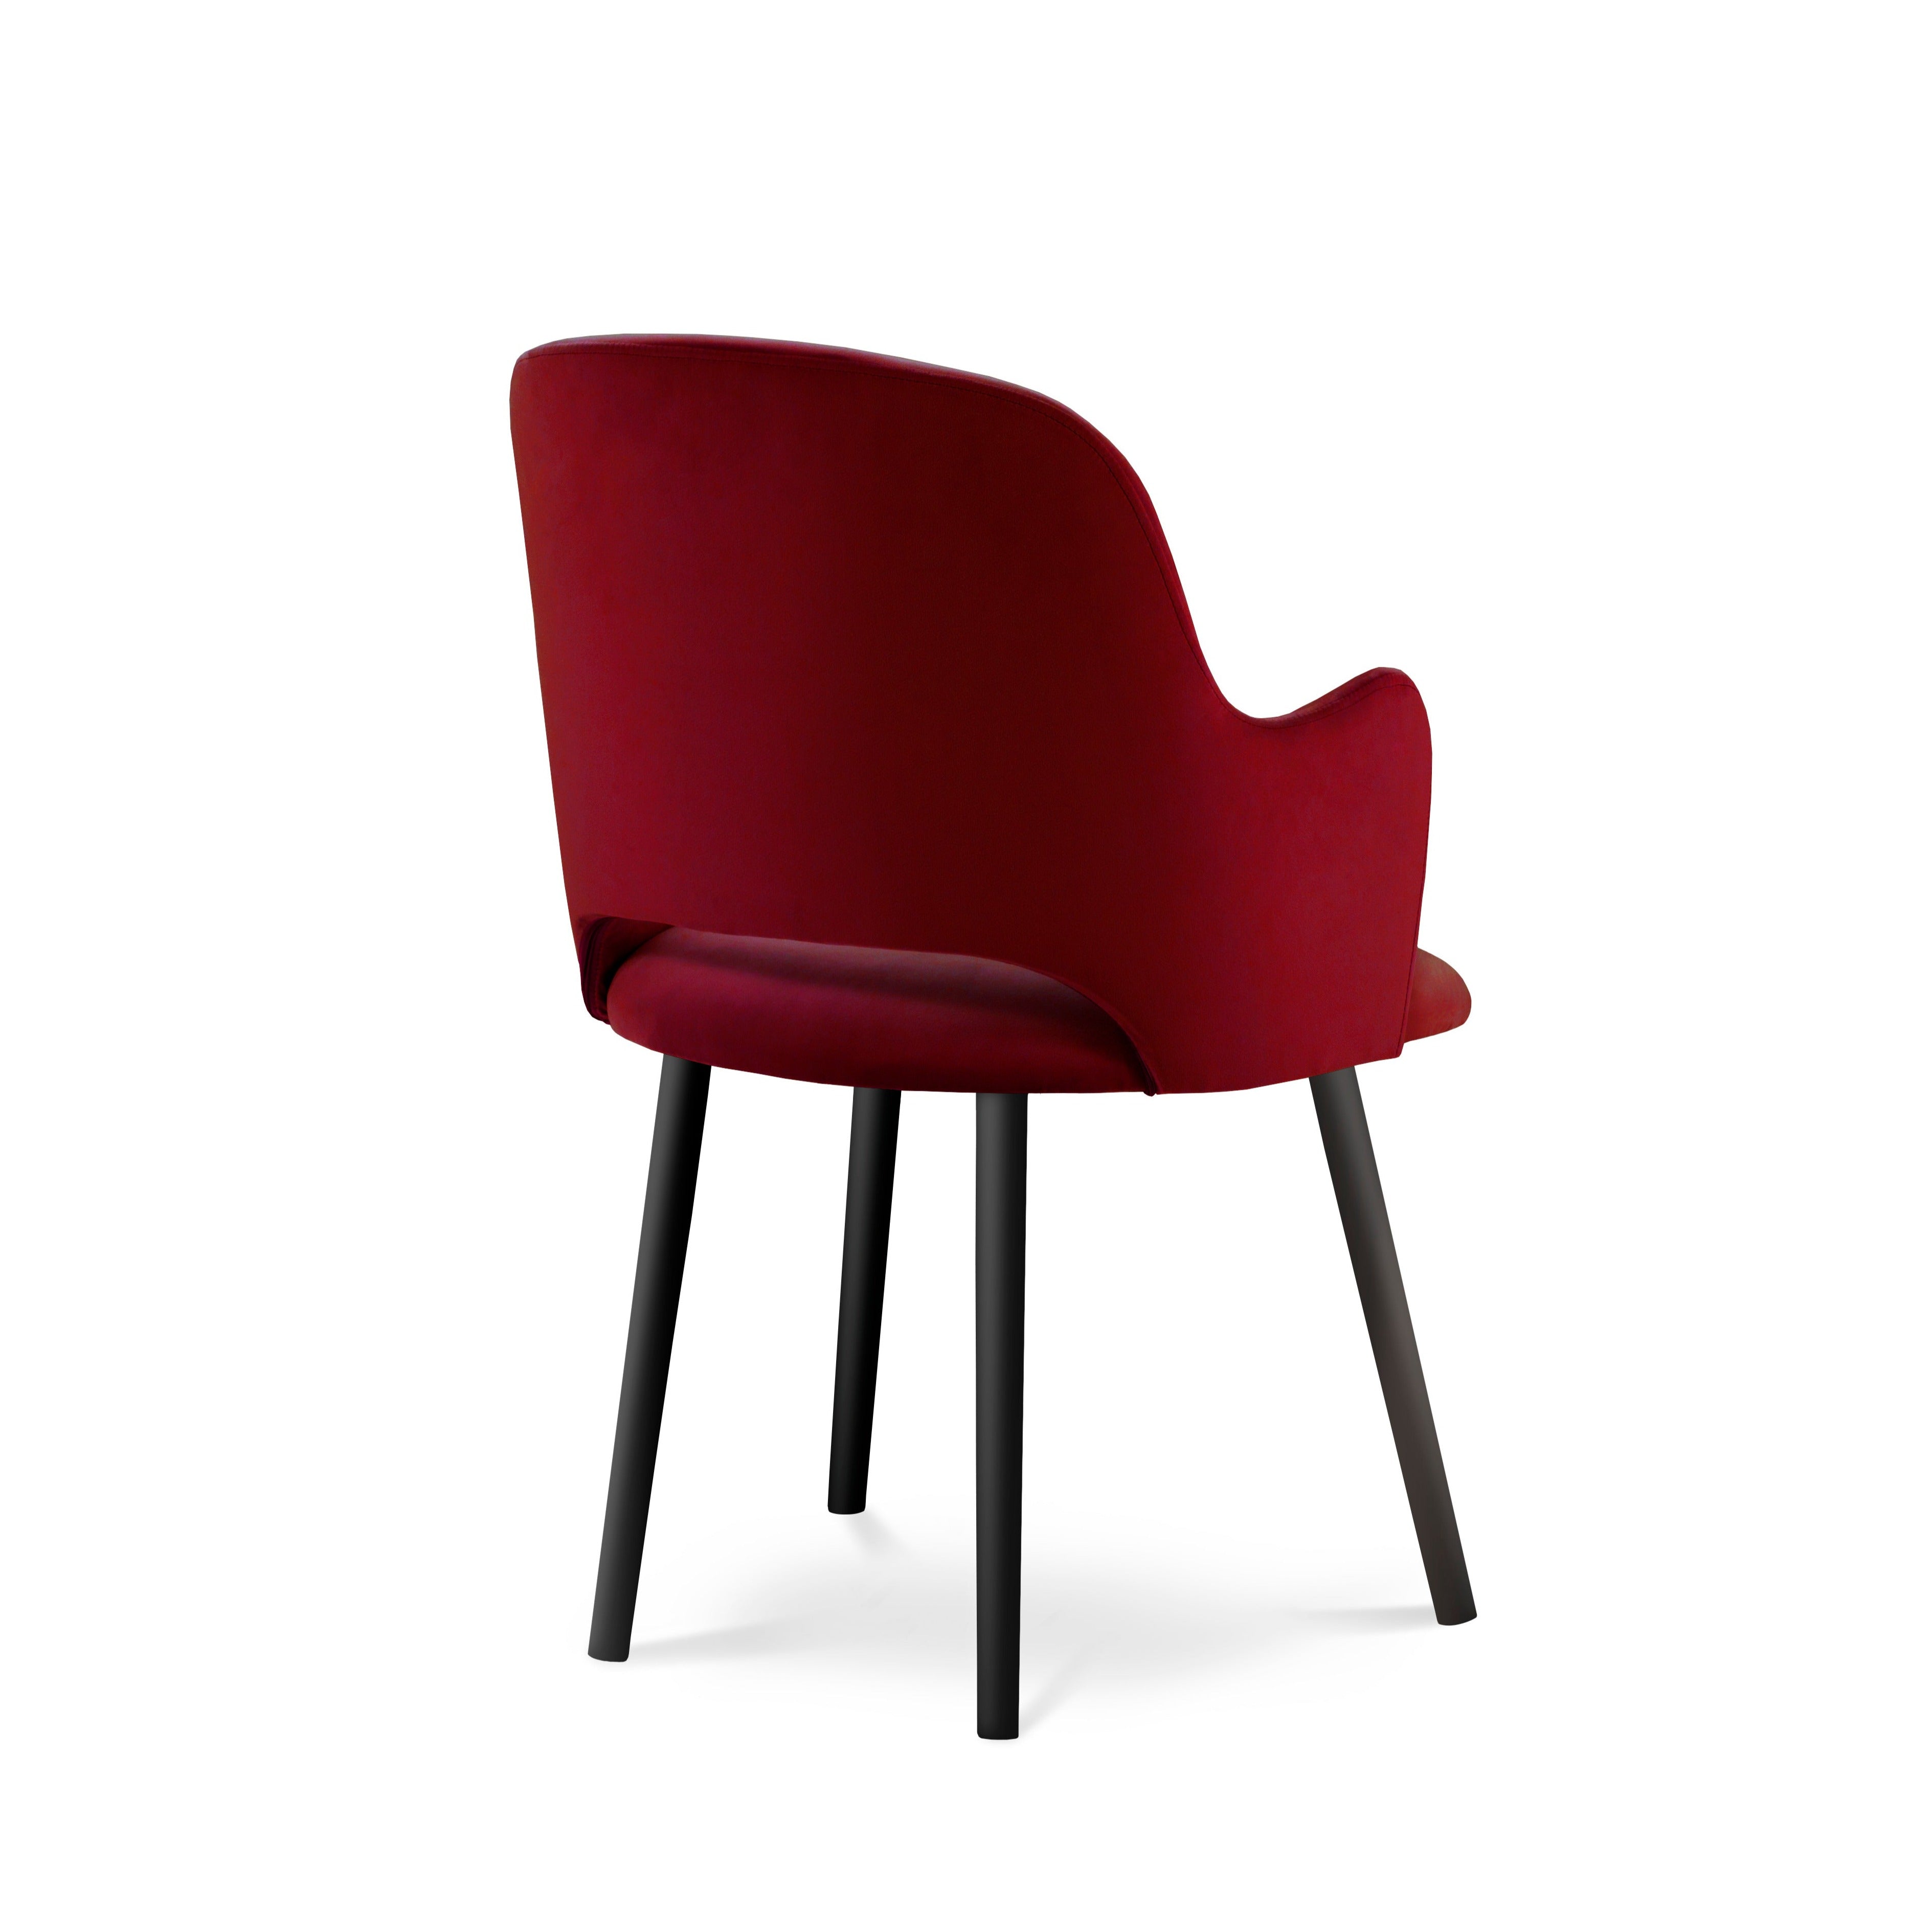 Red gloss chair